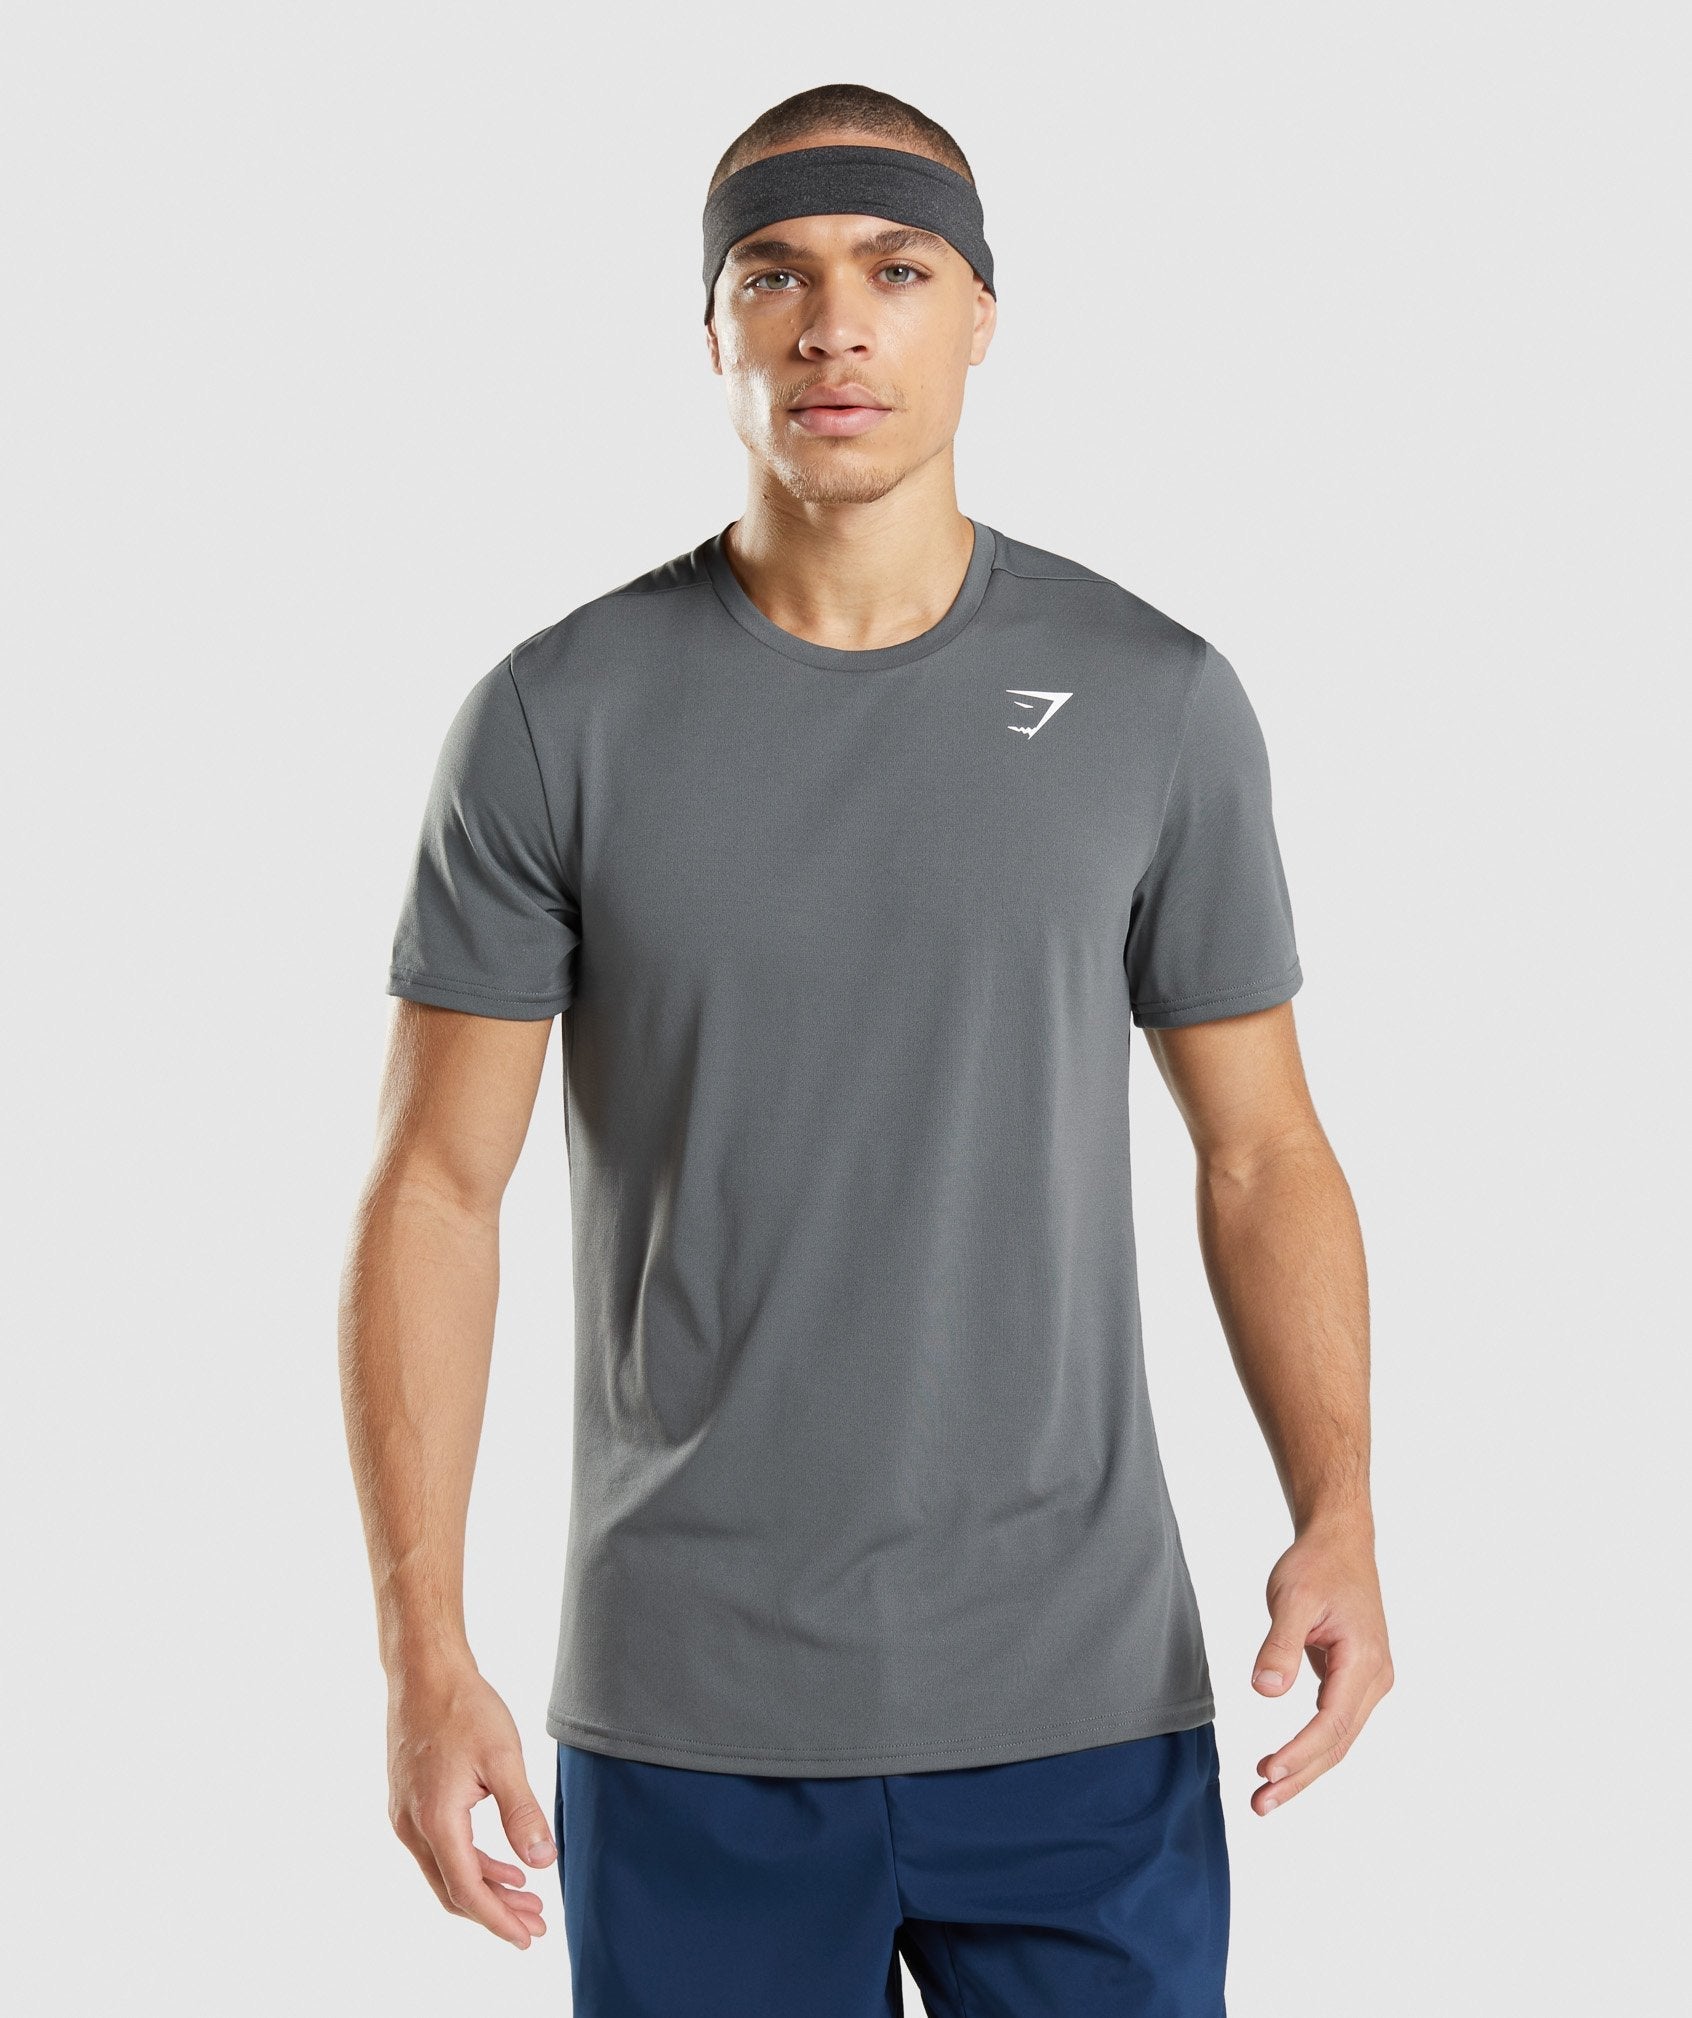 Arrival T-Shirt in Charcoal - view 1